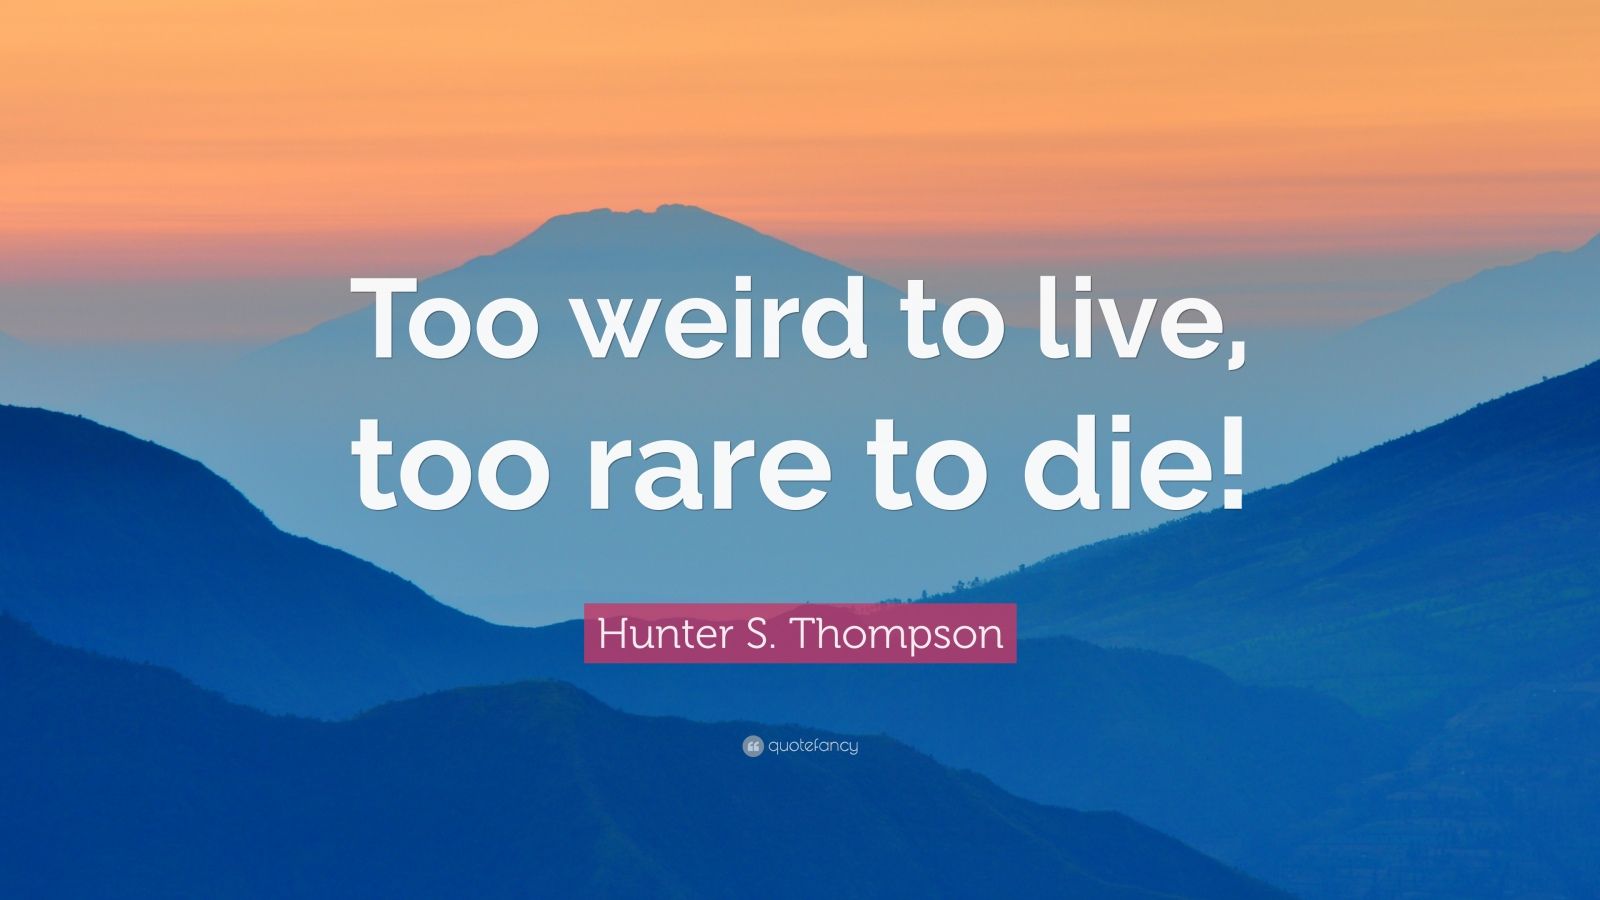 Hunter S. Thompson: “Too weird to live, too rare to die”